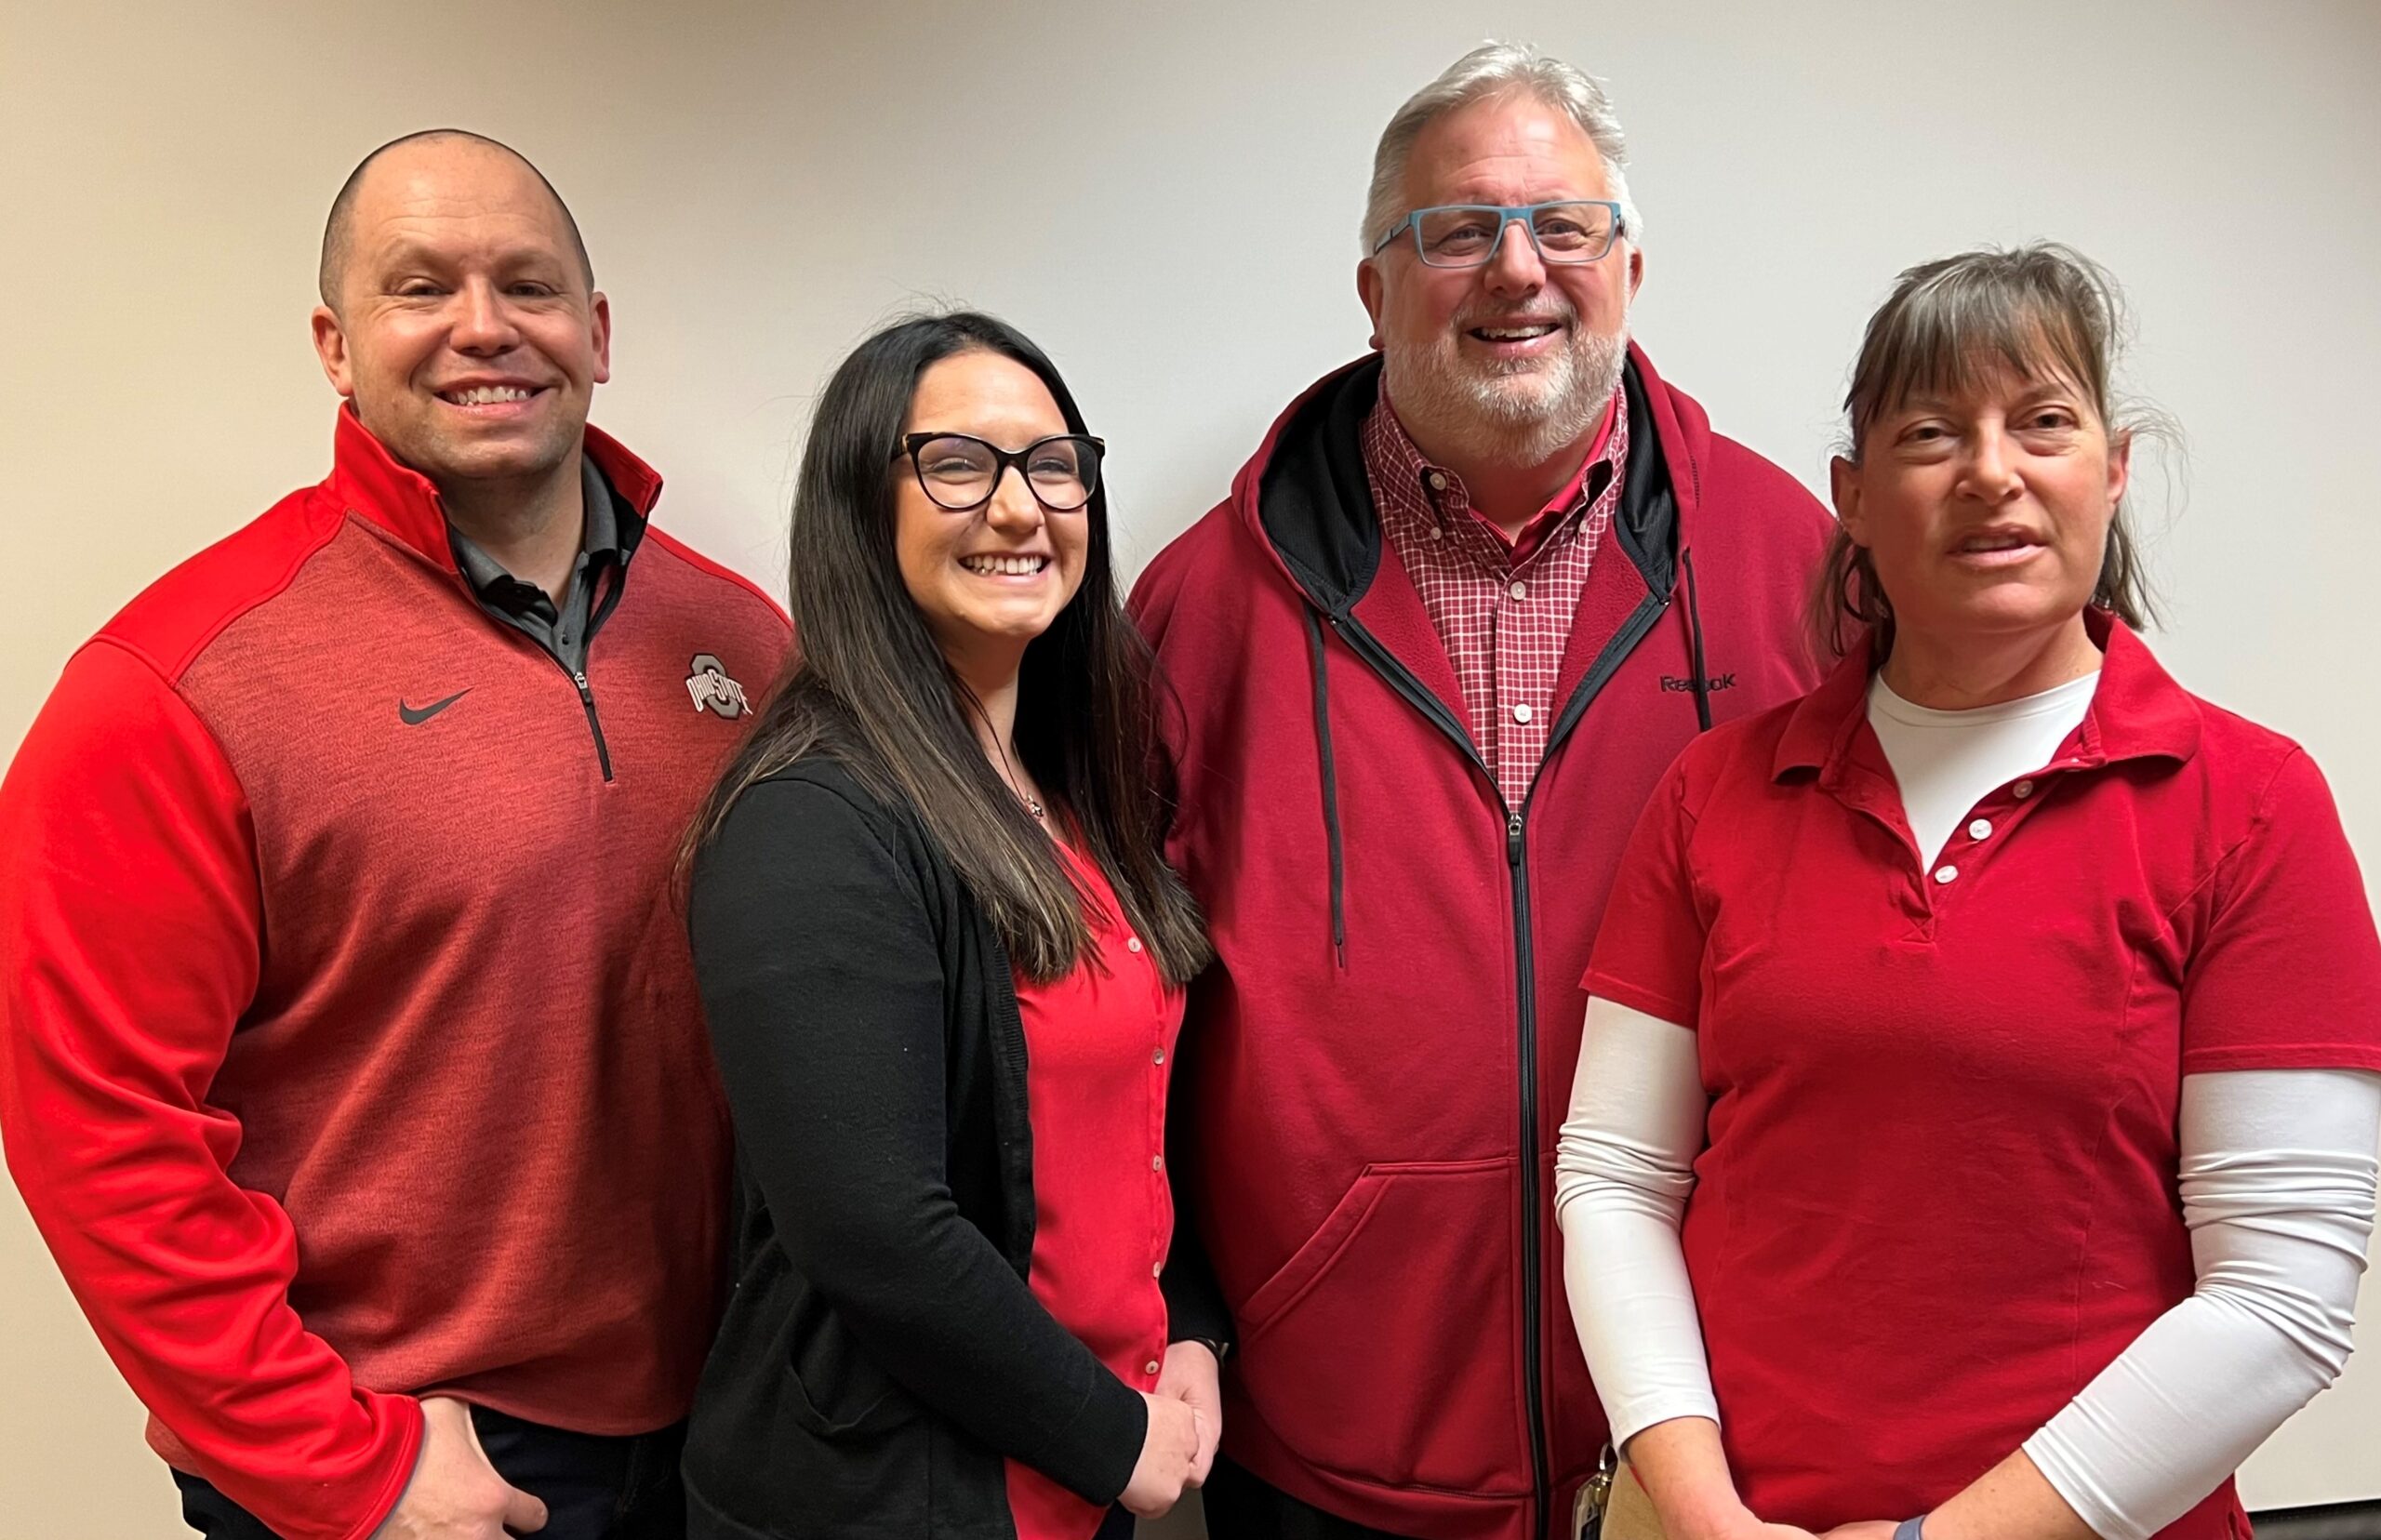 The RED Team – Putting Our People First